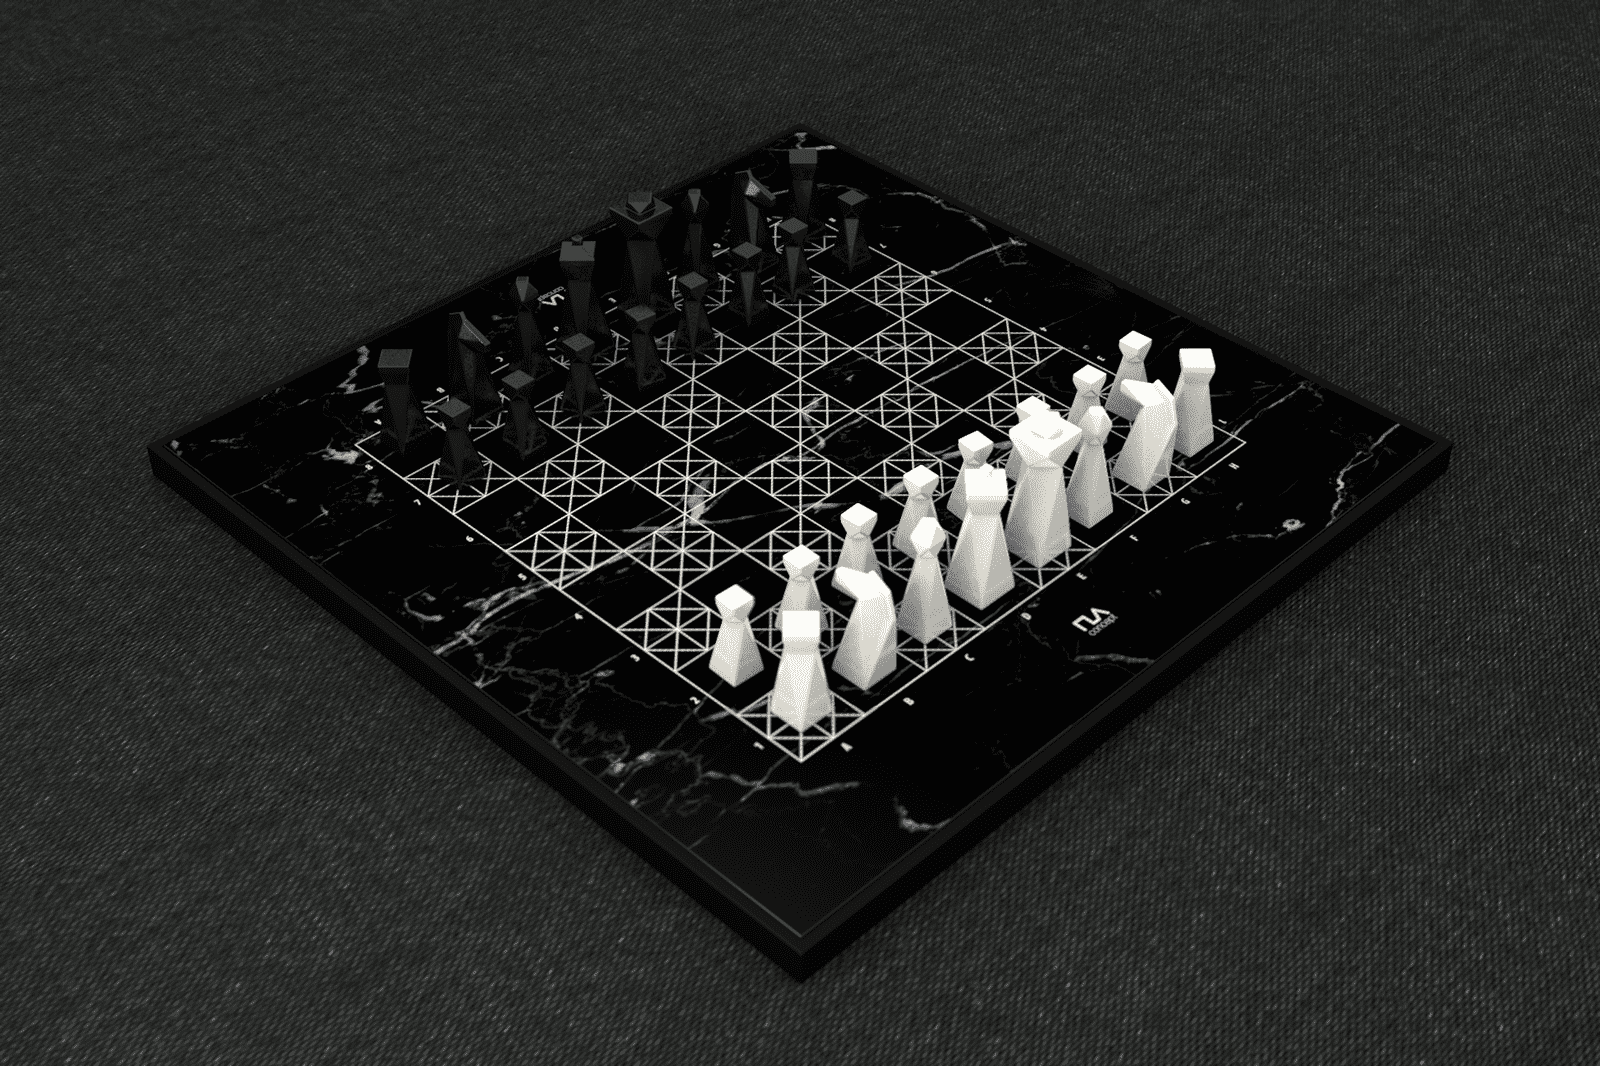 The Most Powerful Piece In The Game Black King Chess Custom Design | Poster